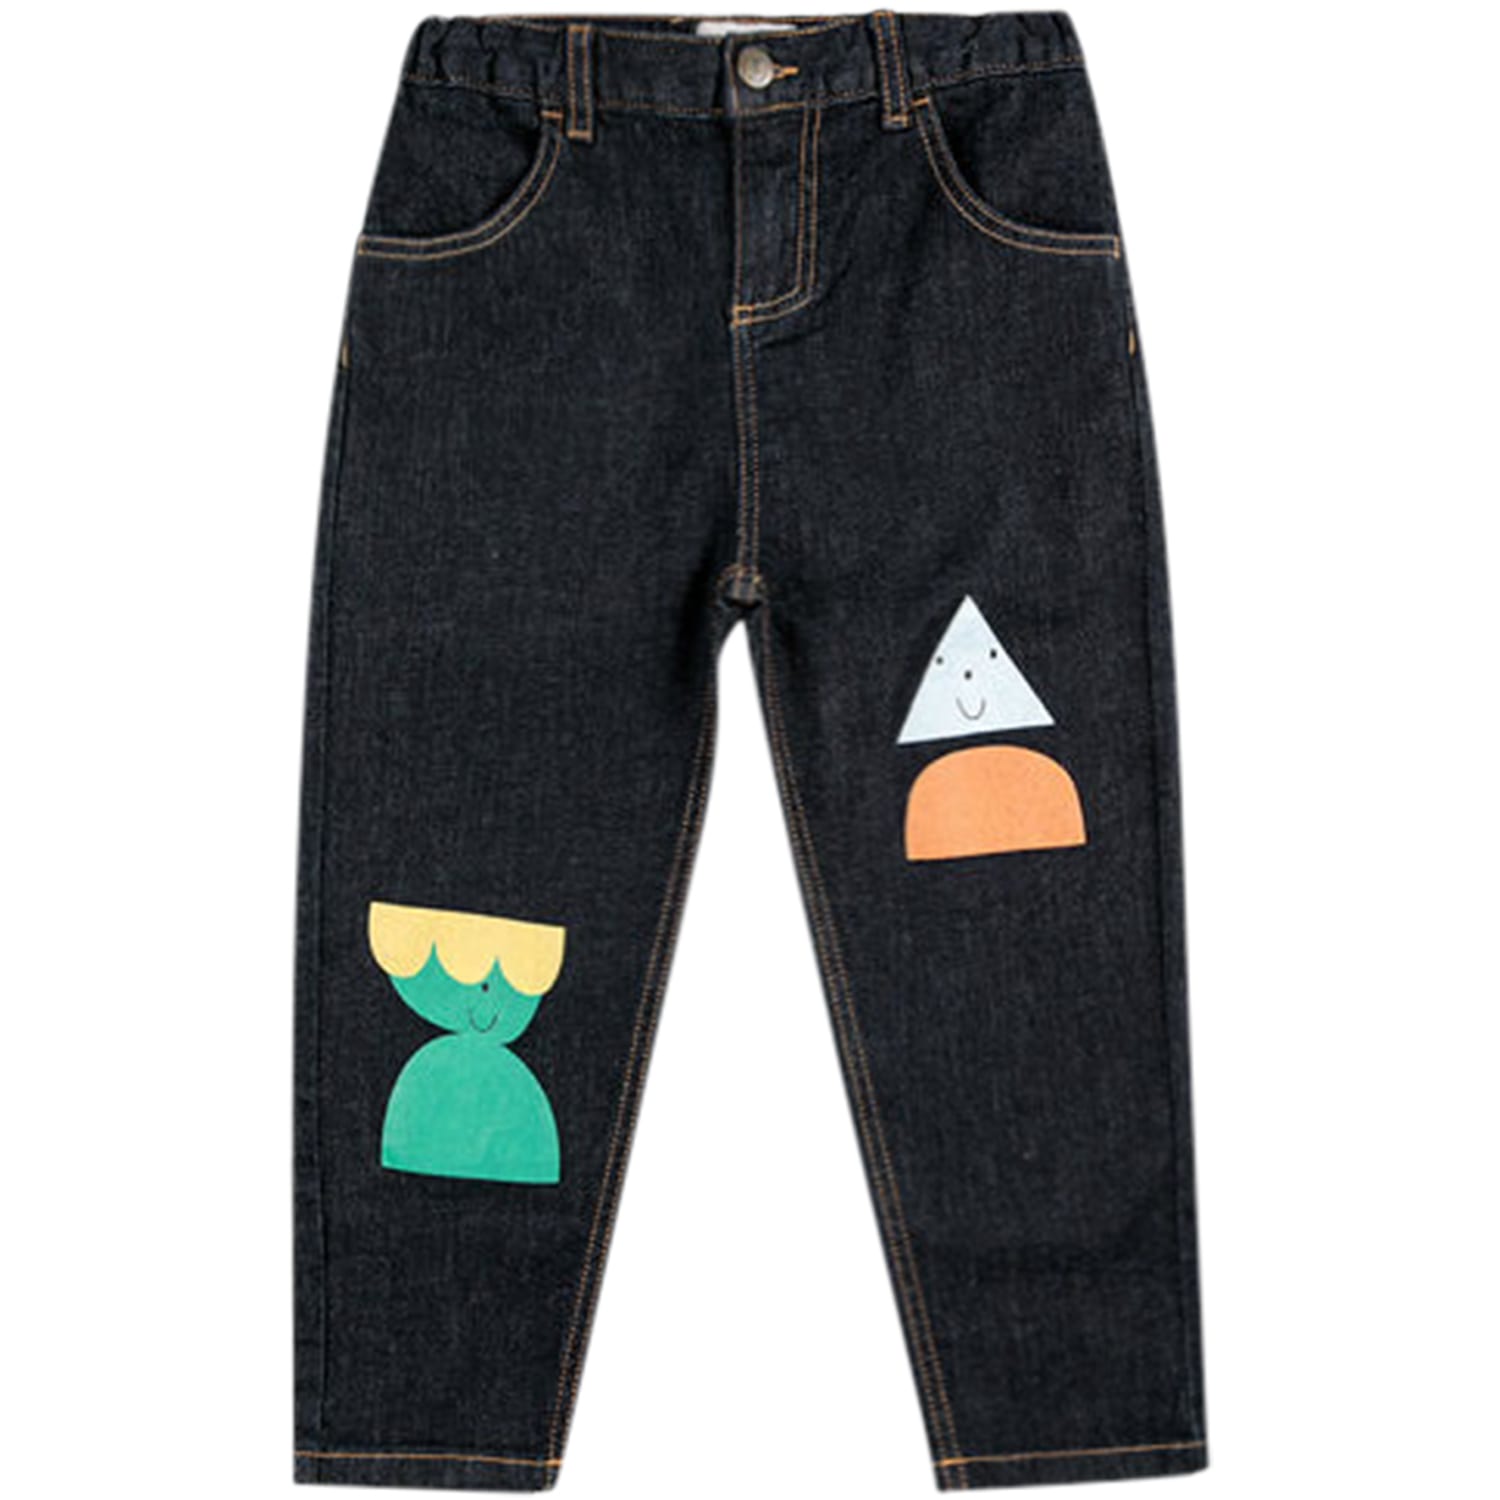 BOBO CHOSES BLUE JEANS FOR KIDS WITH GEOMETRIC PRINTING AND LOGO